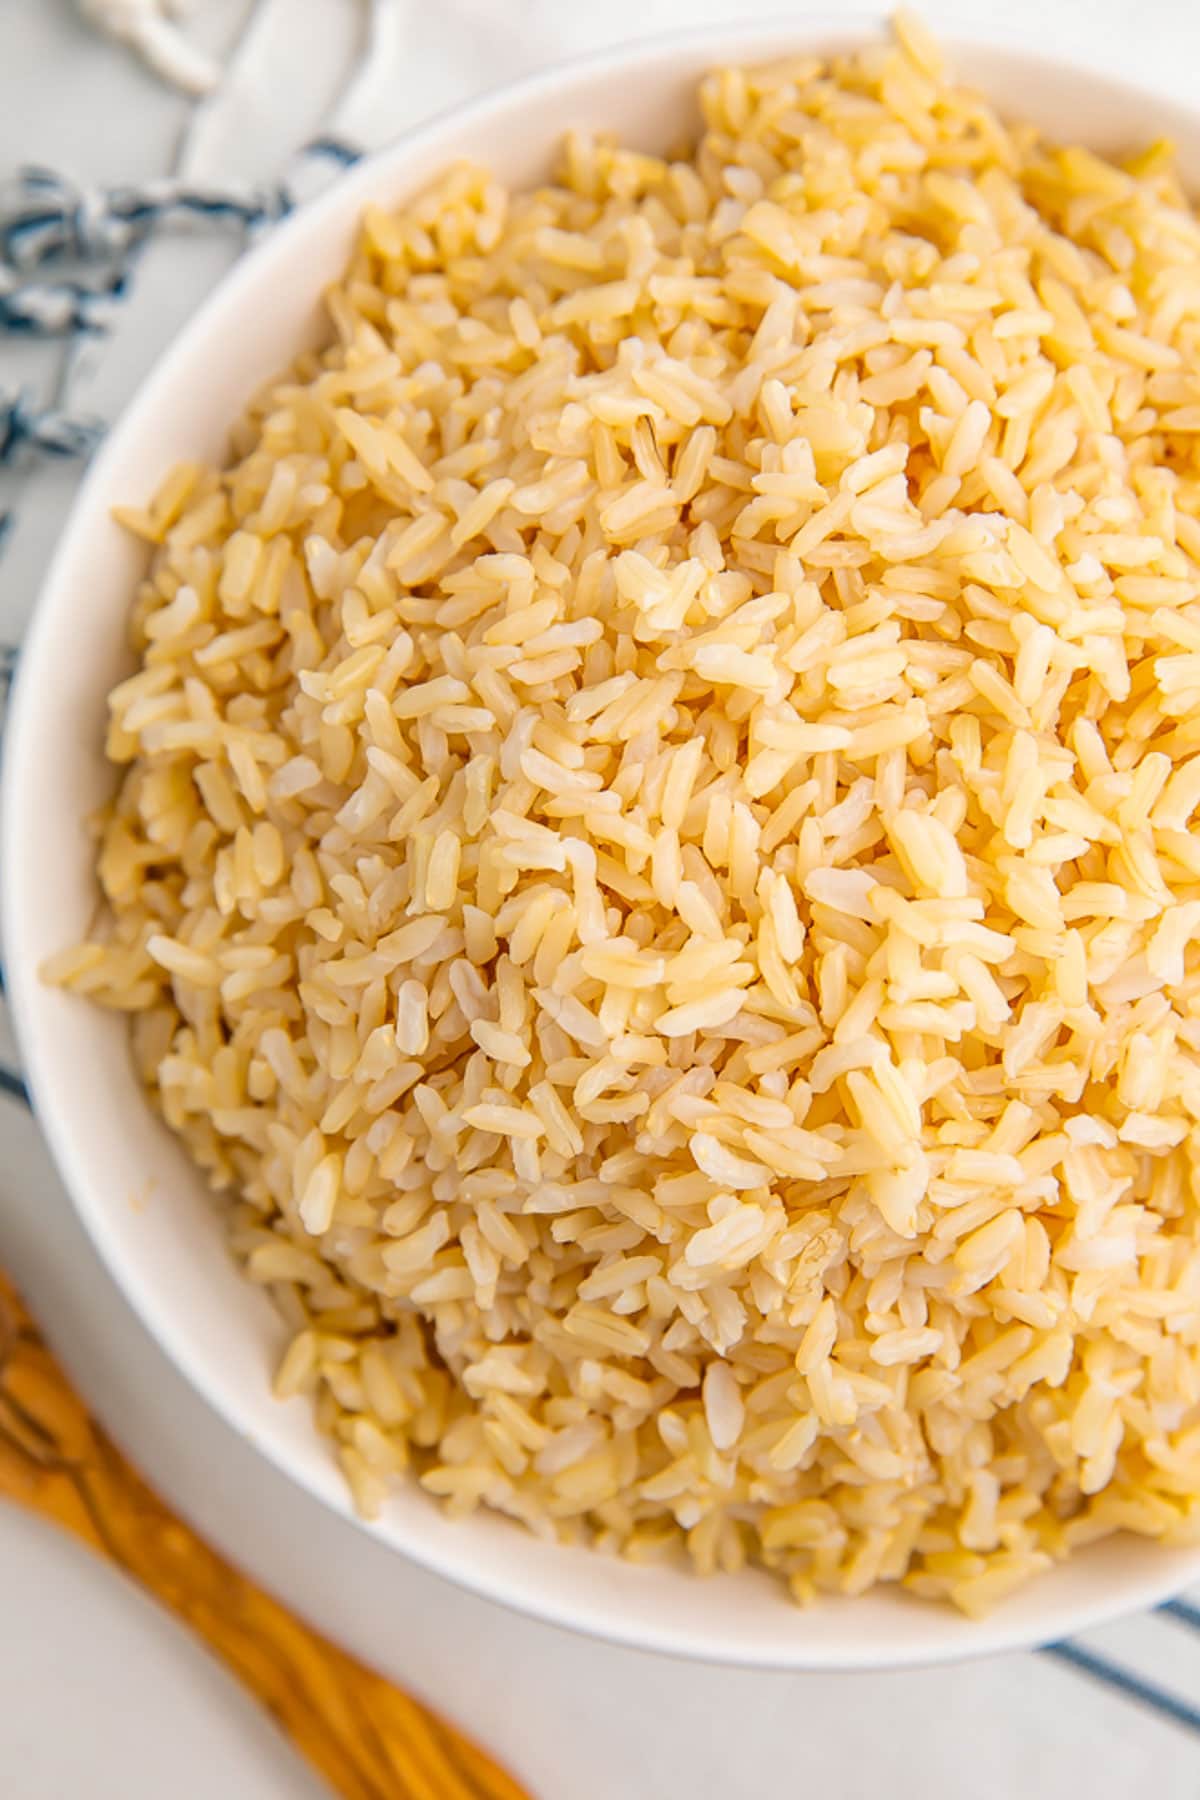 Ficheiro:Half a cup of rice. Brown rice is the best choice.JPG